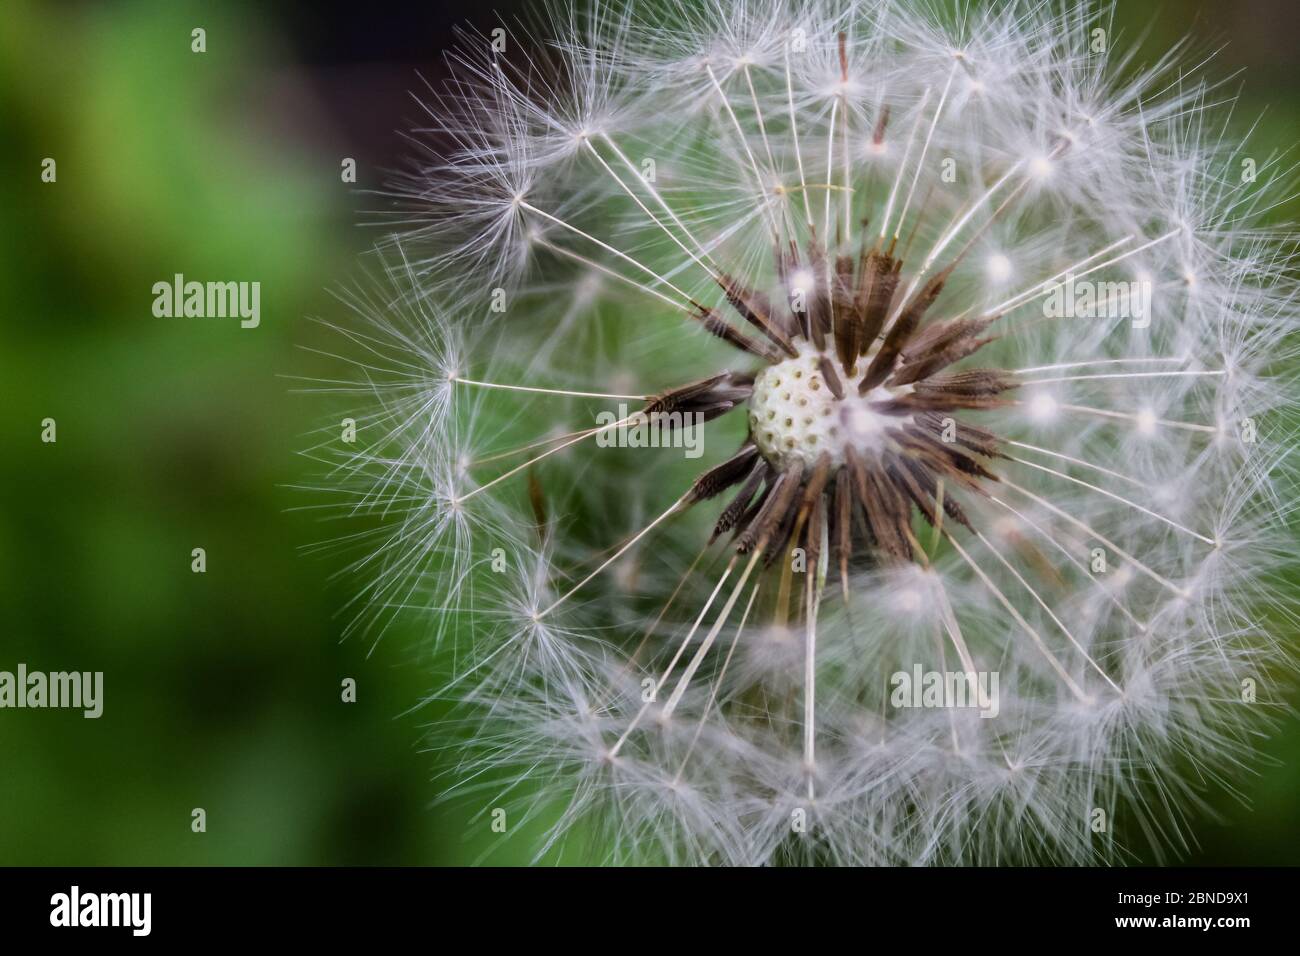 Close up on the details of a dandelion. Stock Photo